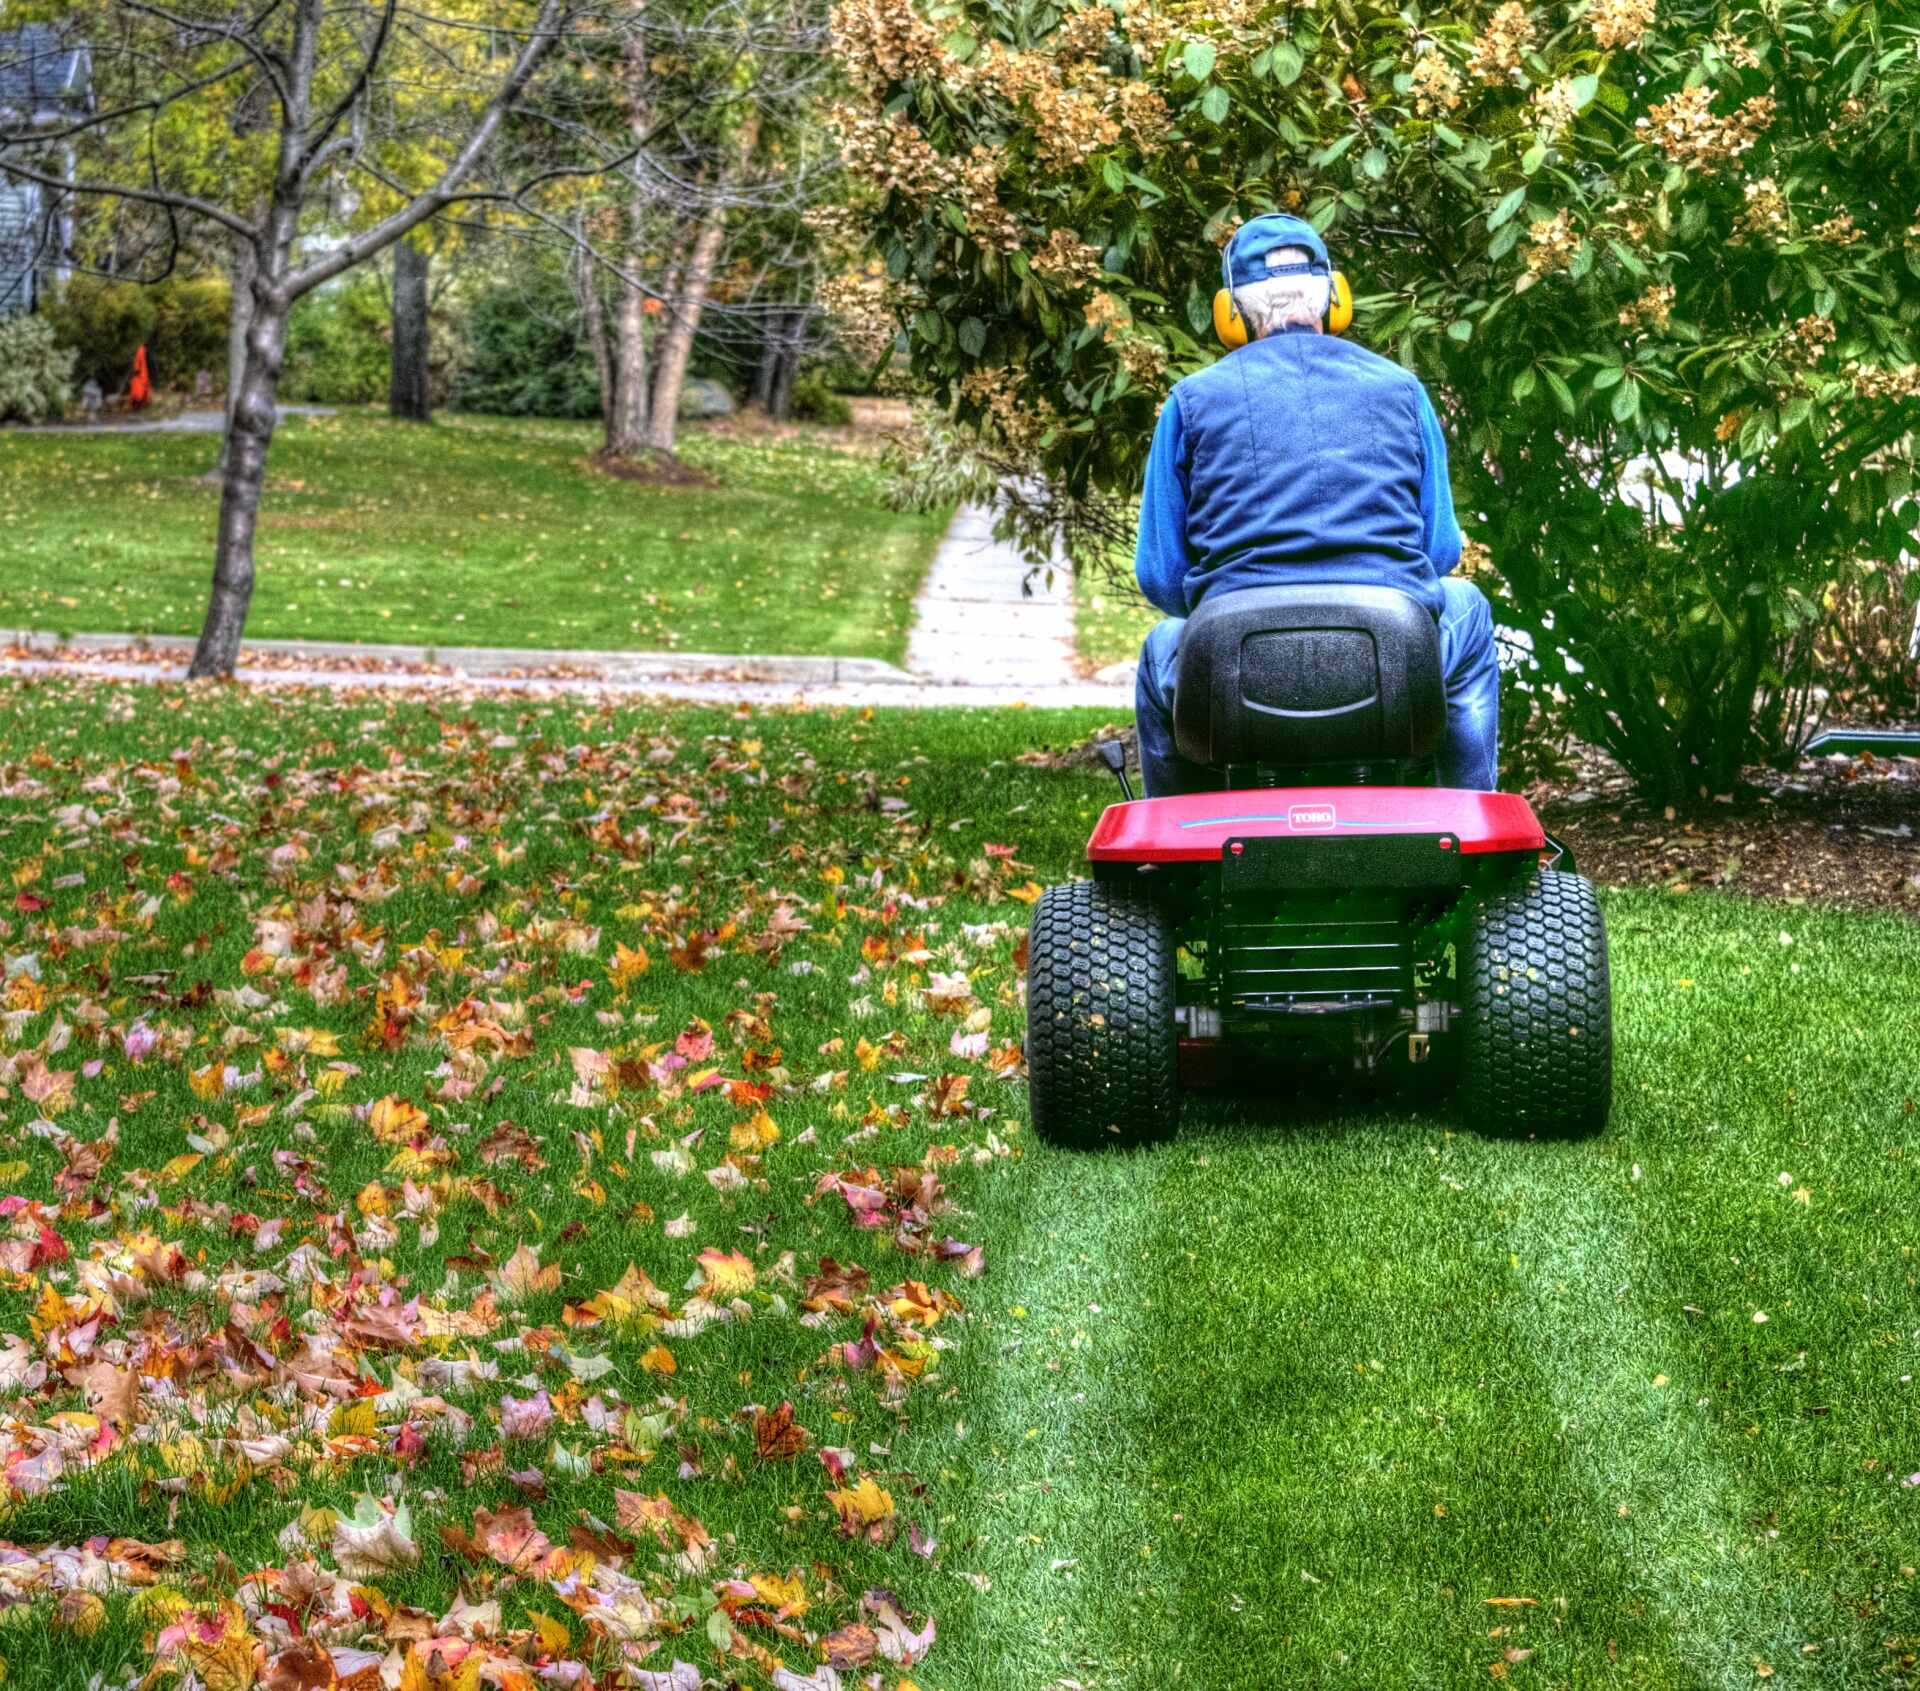 Photograph of a man using gas-powered lawn mower to mow the grass and chop up fallen leaves.